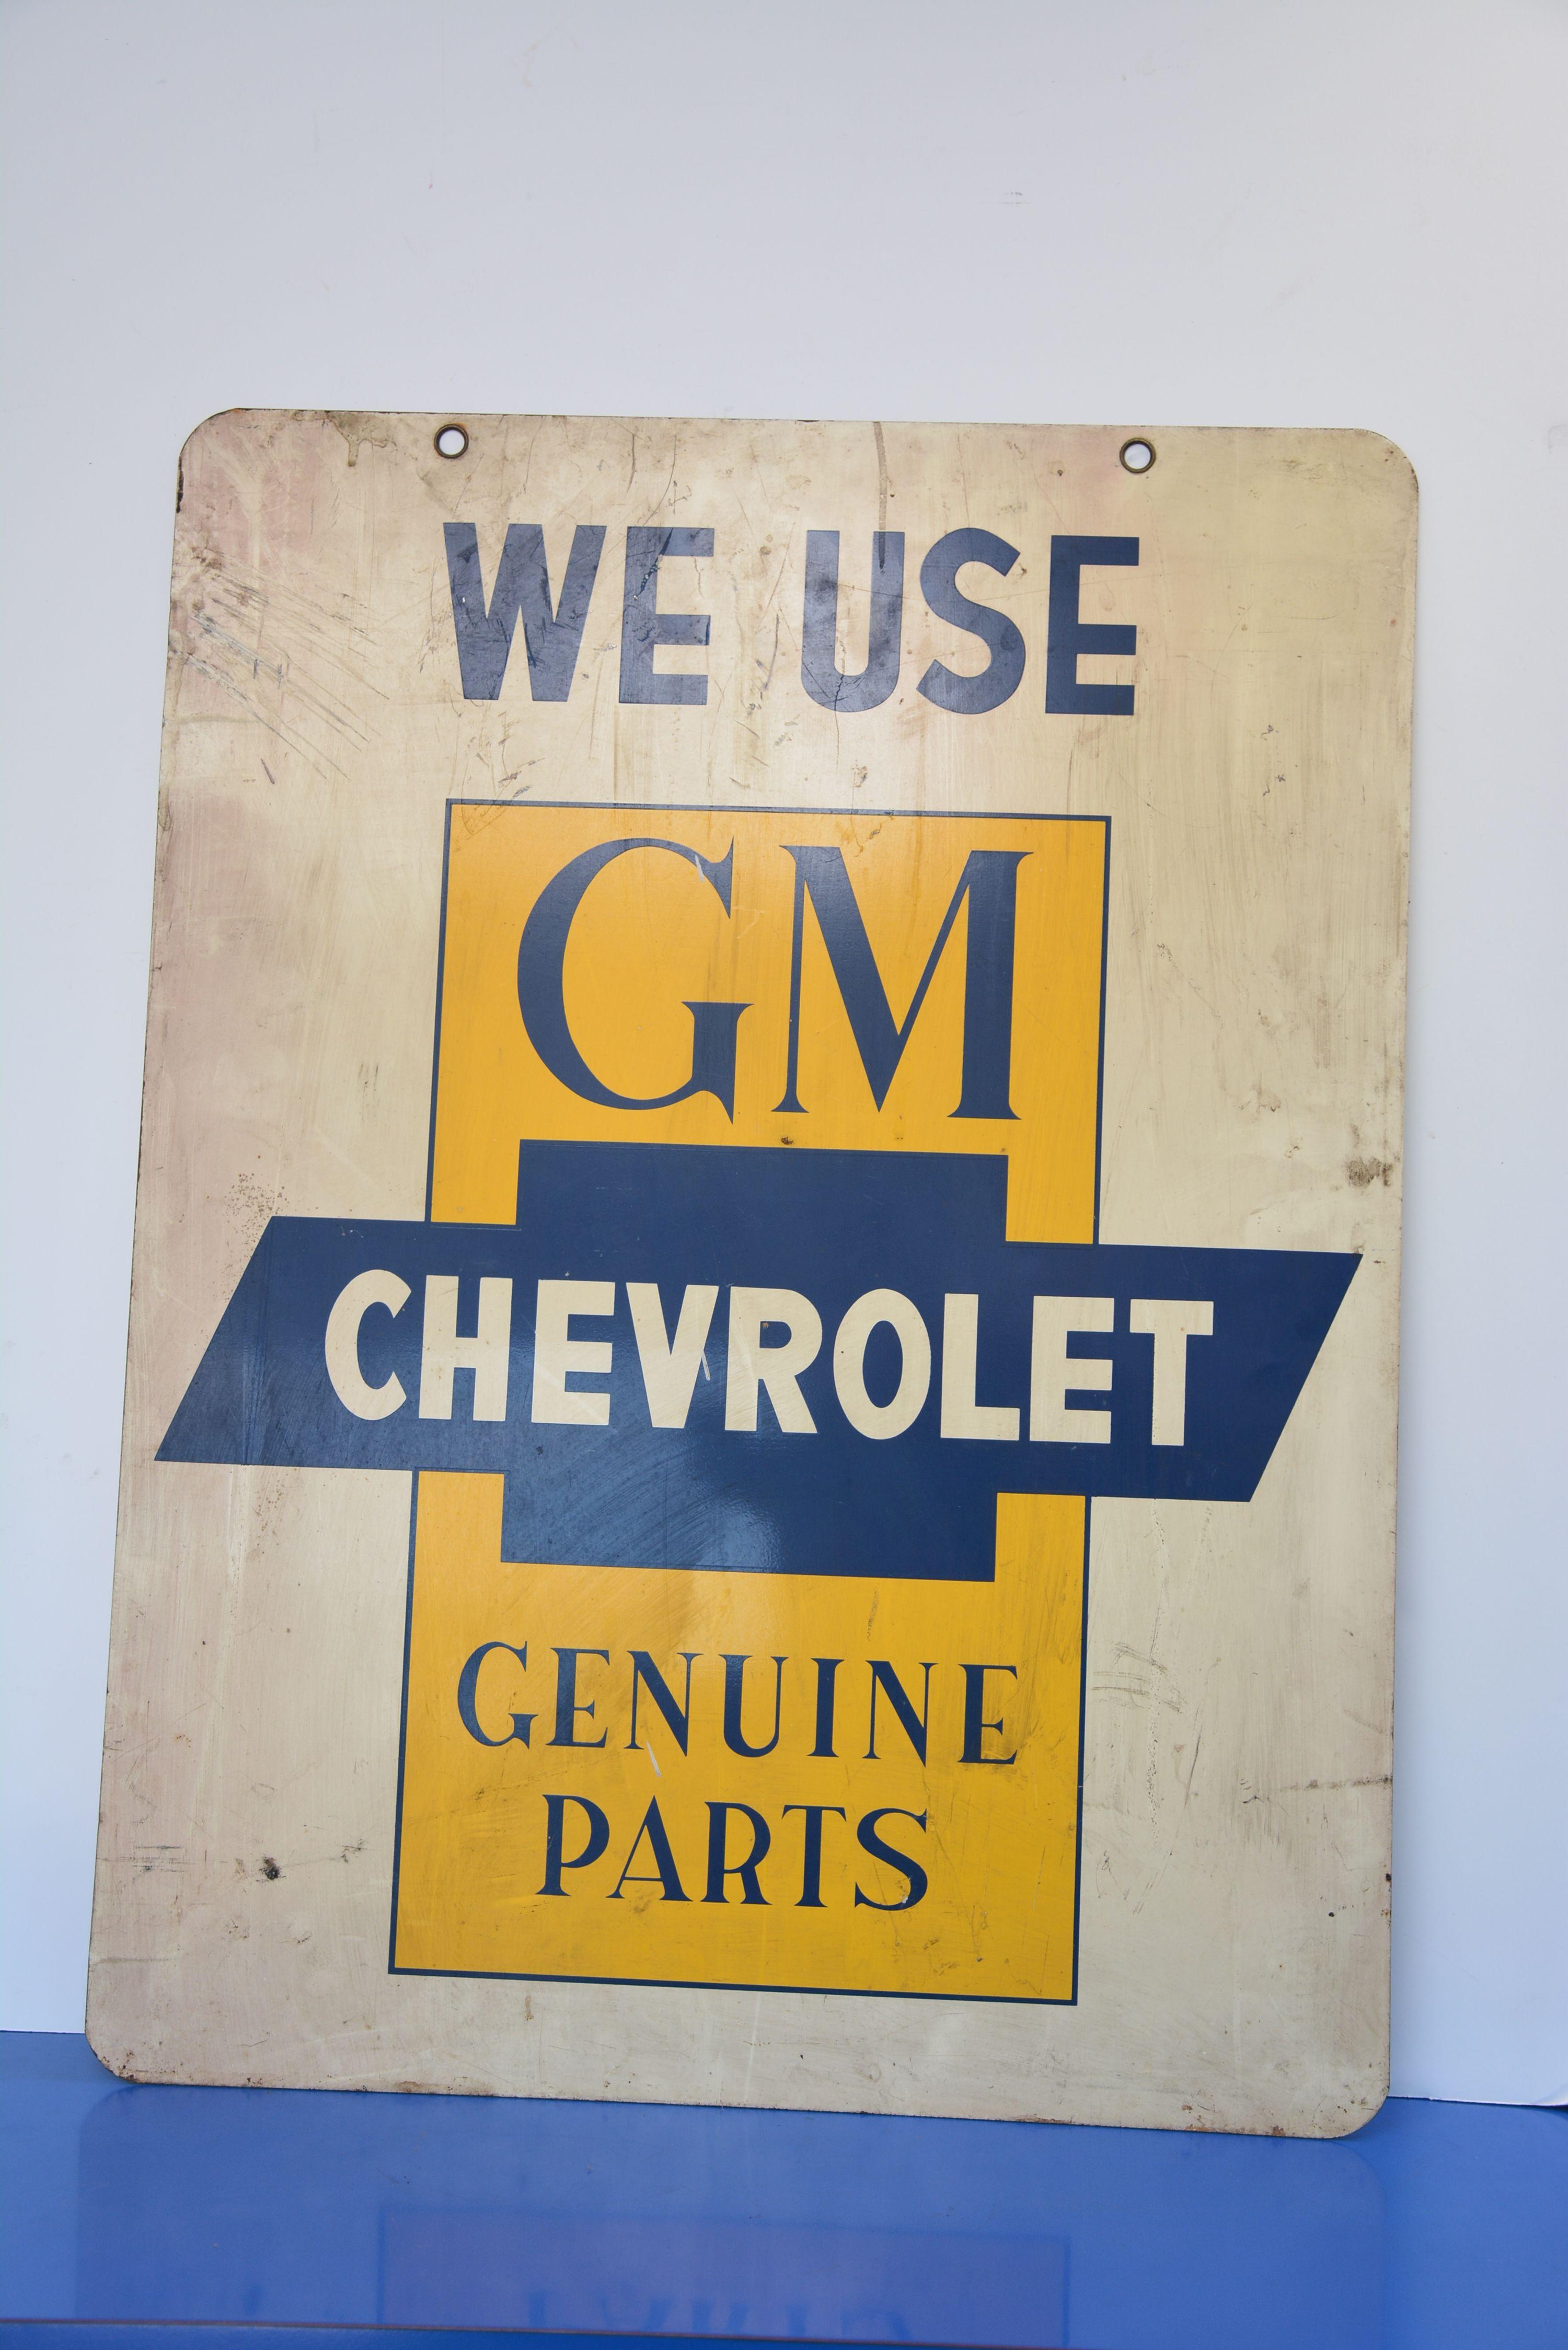 Gm Genuine Parts Metal Sign, Made In Usa #962, 18"x24"